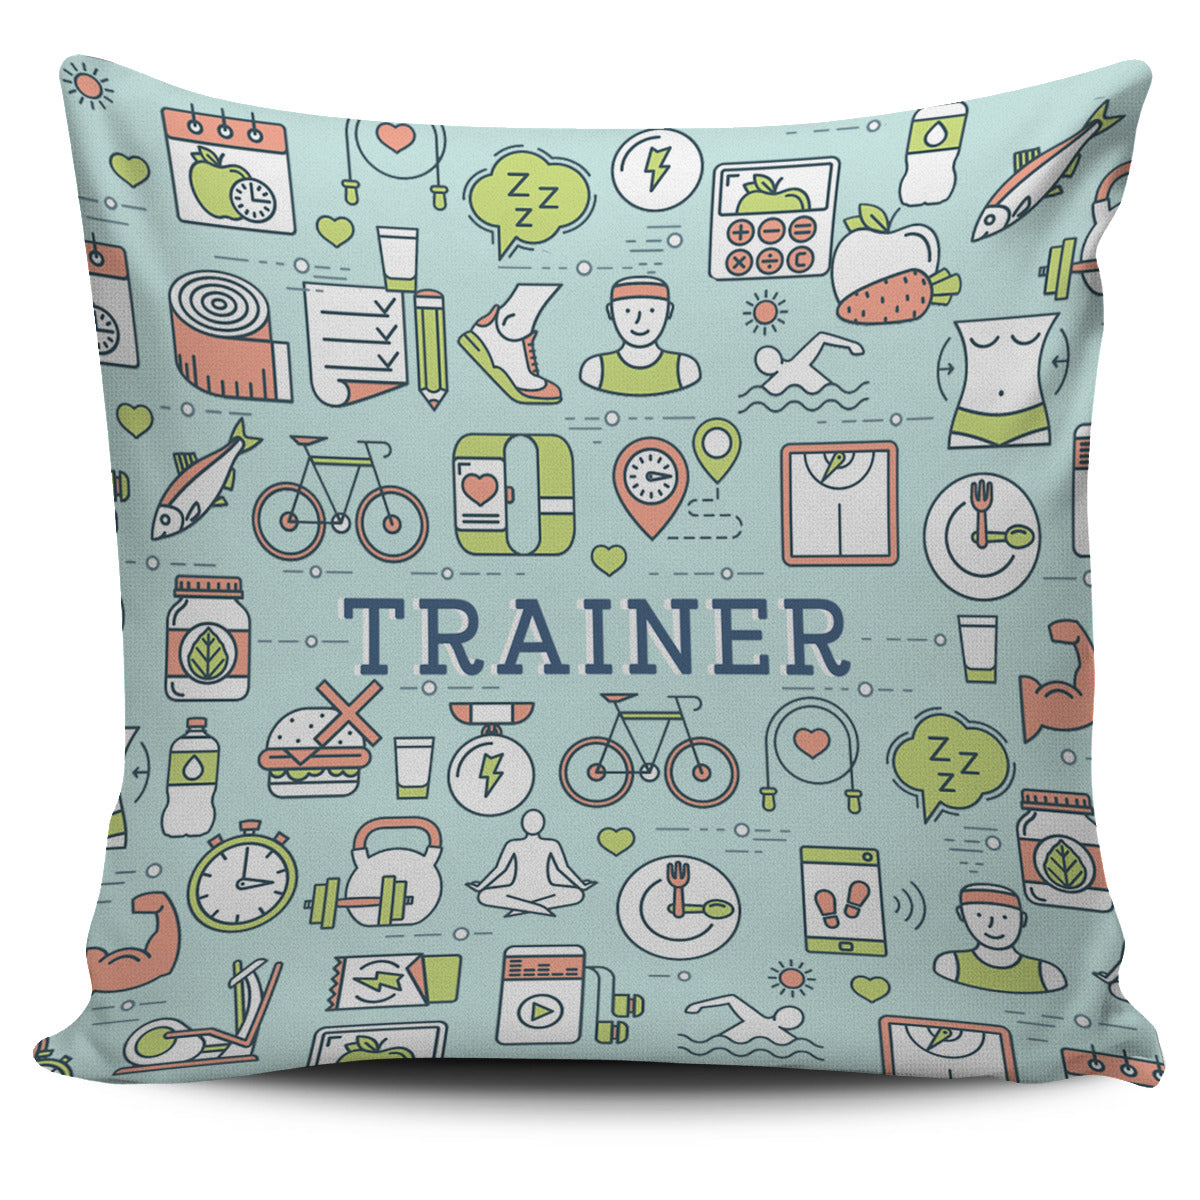 Trainer Pillow Cover